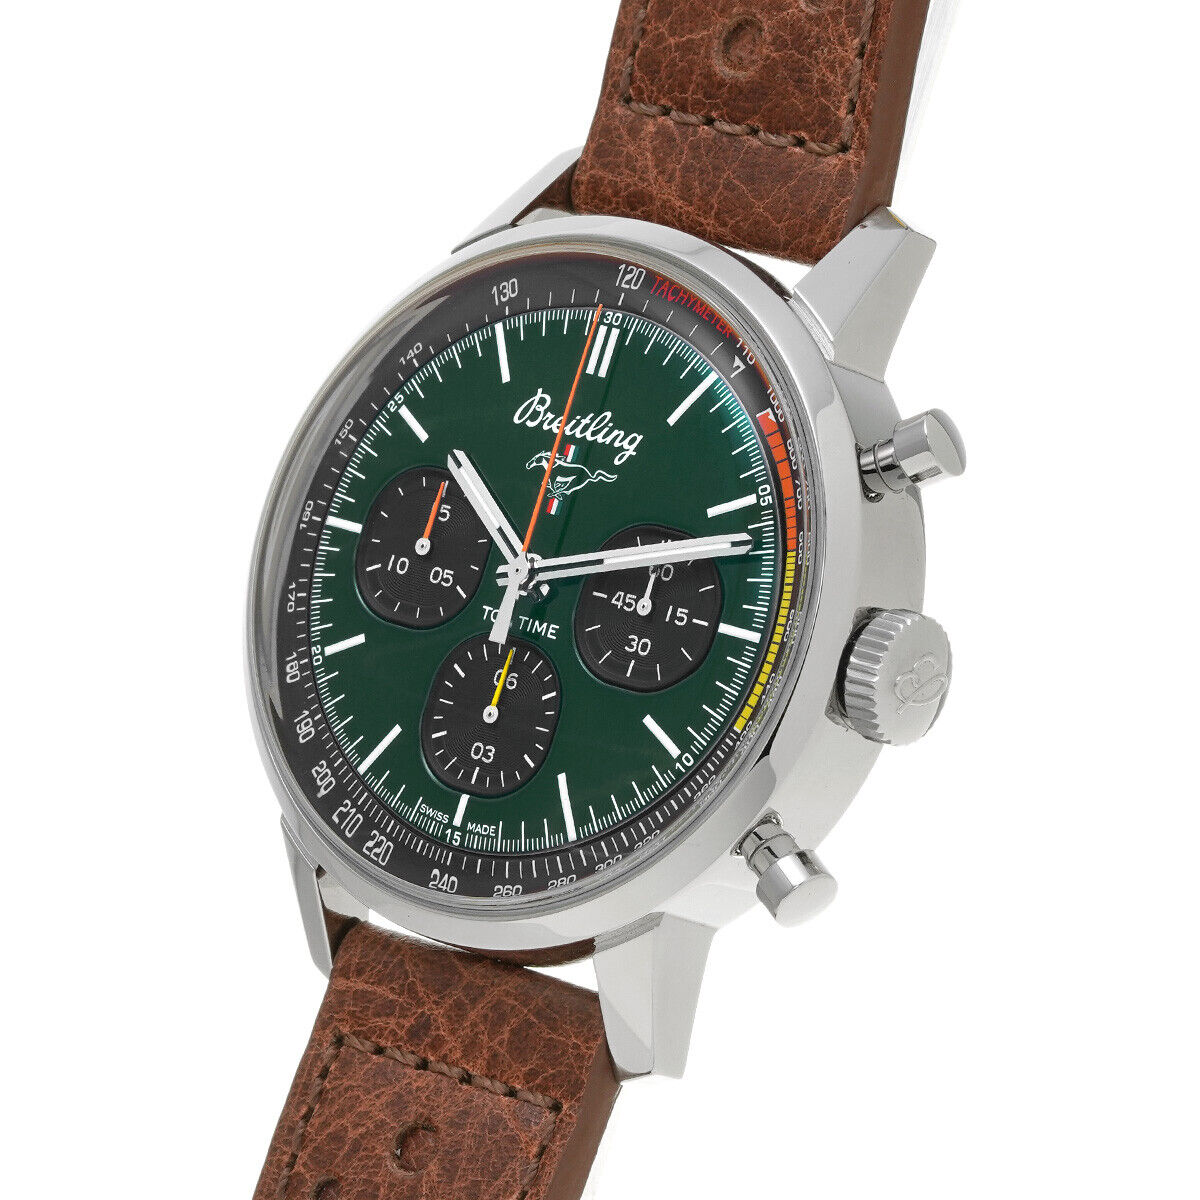 Breitling Top Time Ford | Breitling Mustang Watch | Harley's Time